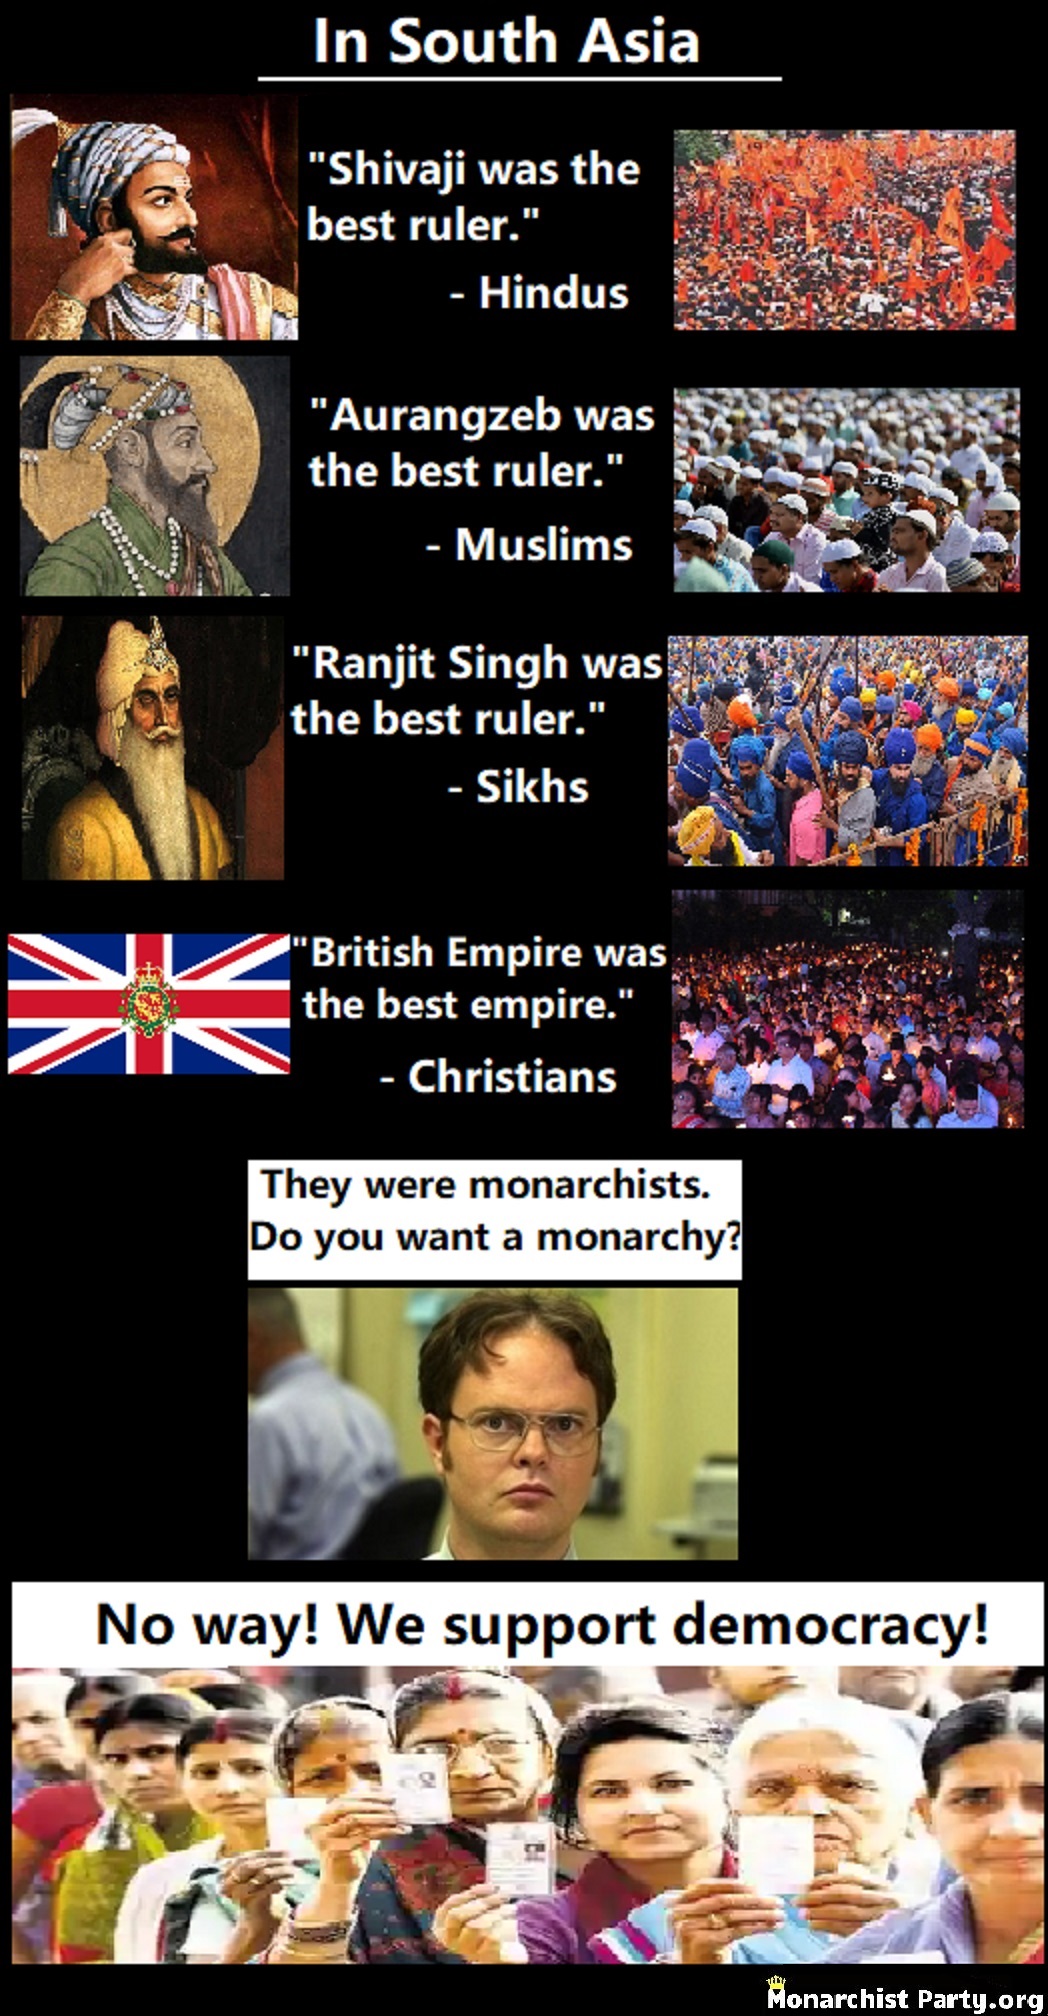 Monarchism in South Asia